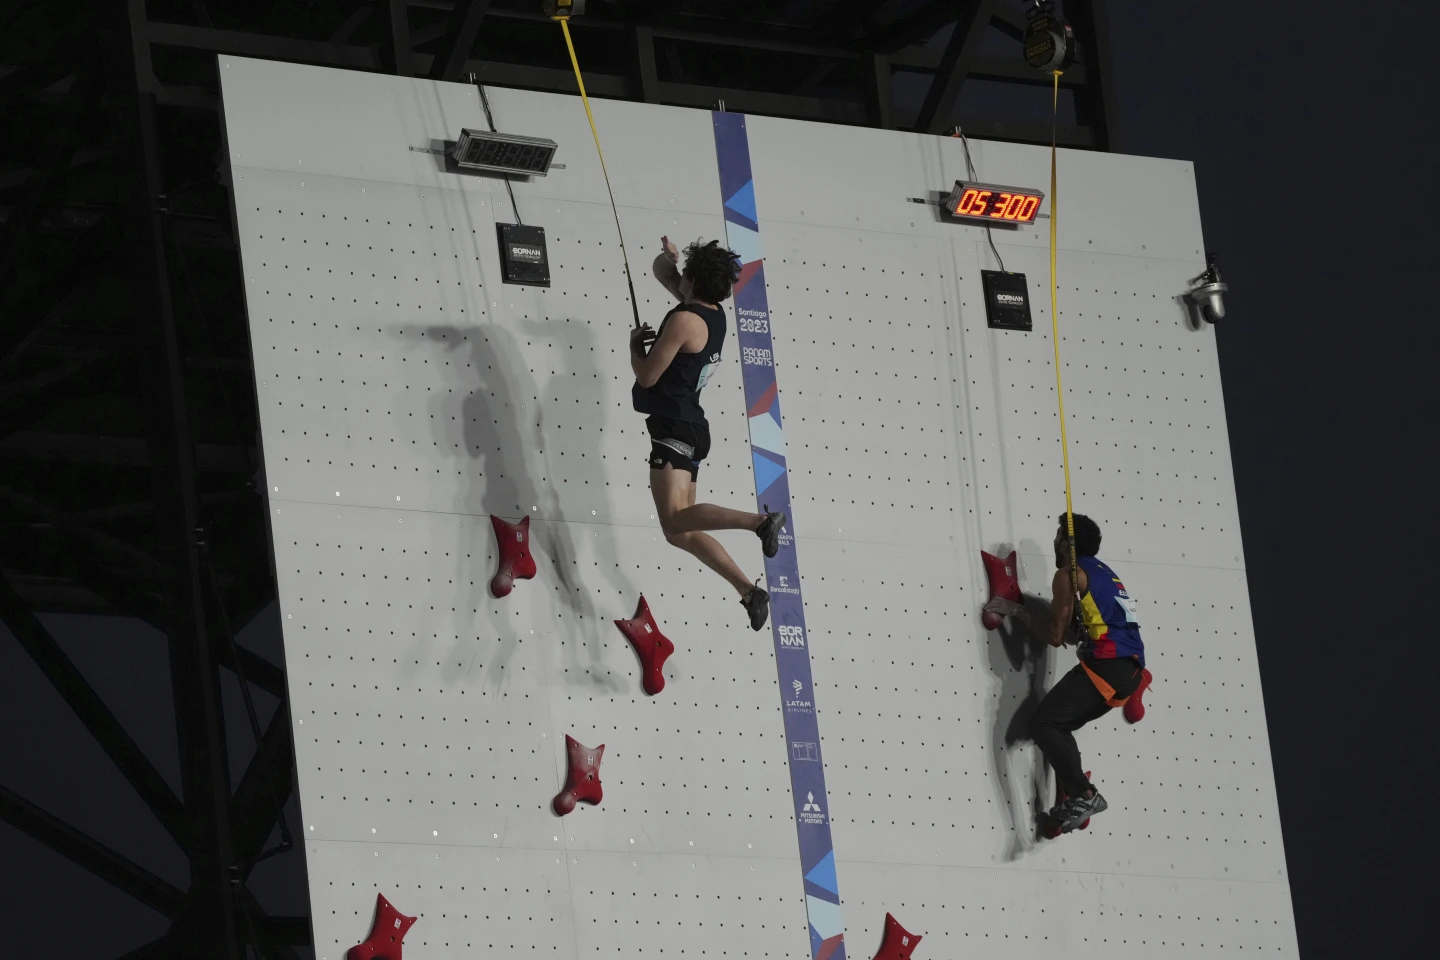 Samuel Watson (L) of USA competes in the speed climbing men's event at the Pan American Games in Santiago, Chile, October 22, 2023. /AP